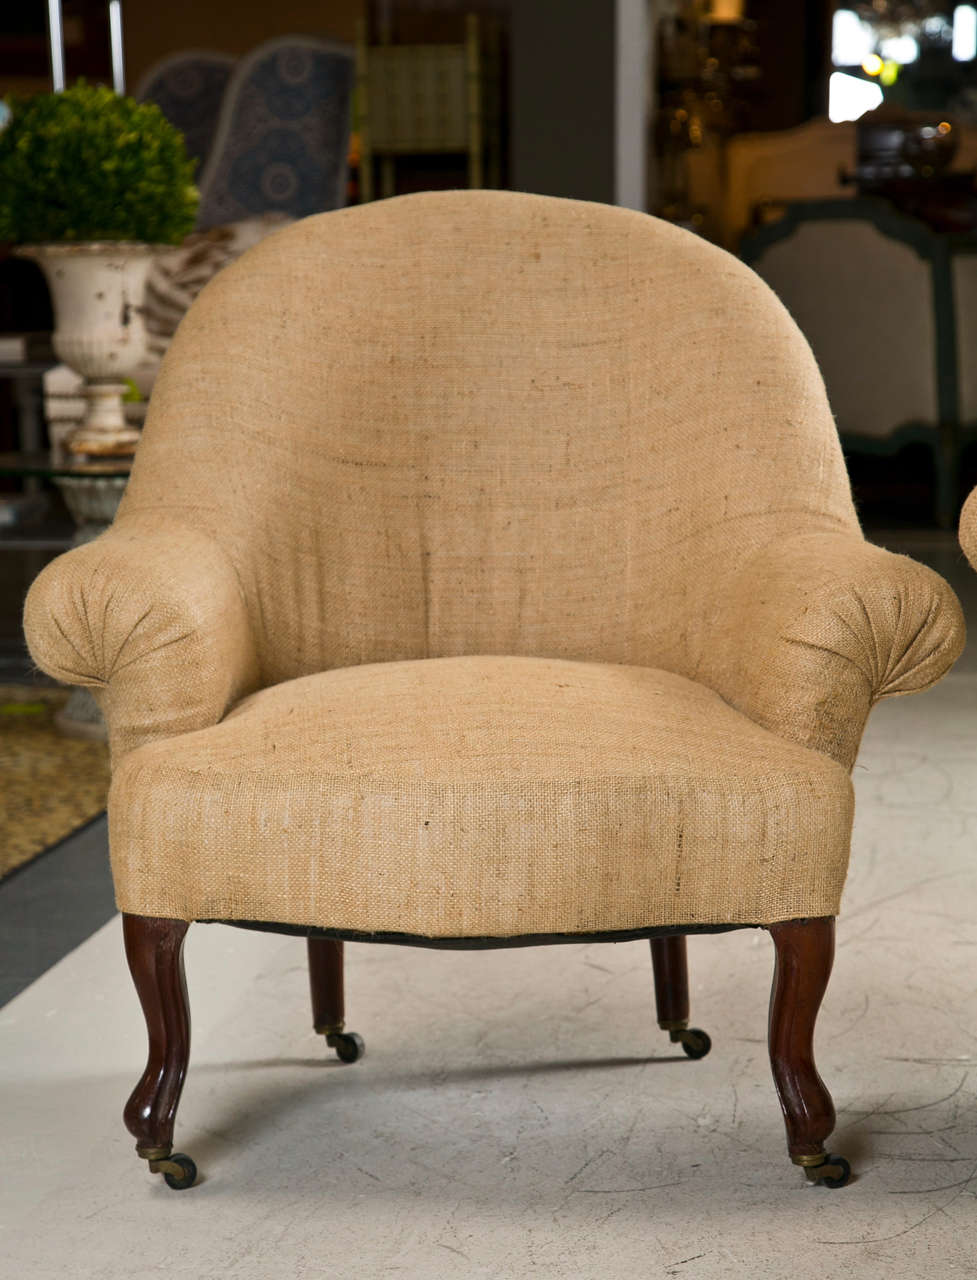 19th C English Slipper Chairs Covered in Burlap 3